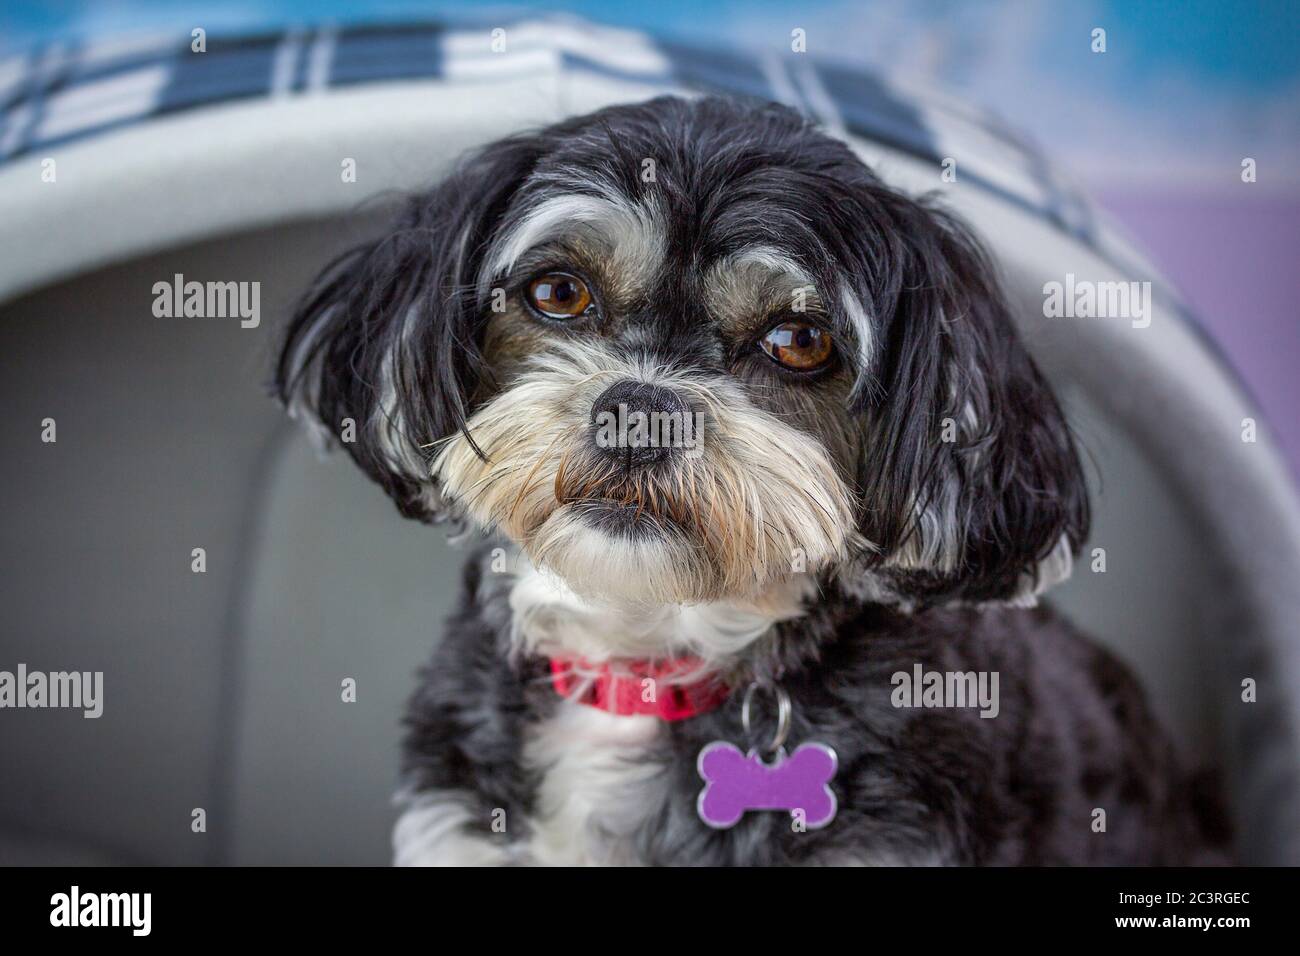 Small cute black and white puppy cavoodle, cockapoo, poodle cross looking wistful Stock Photo